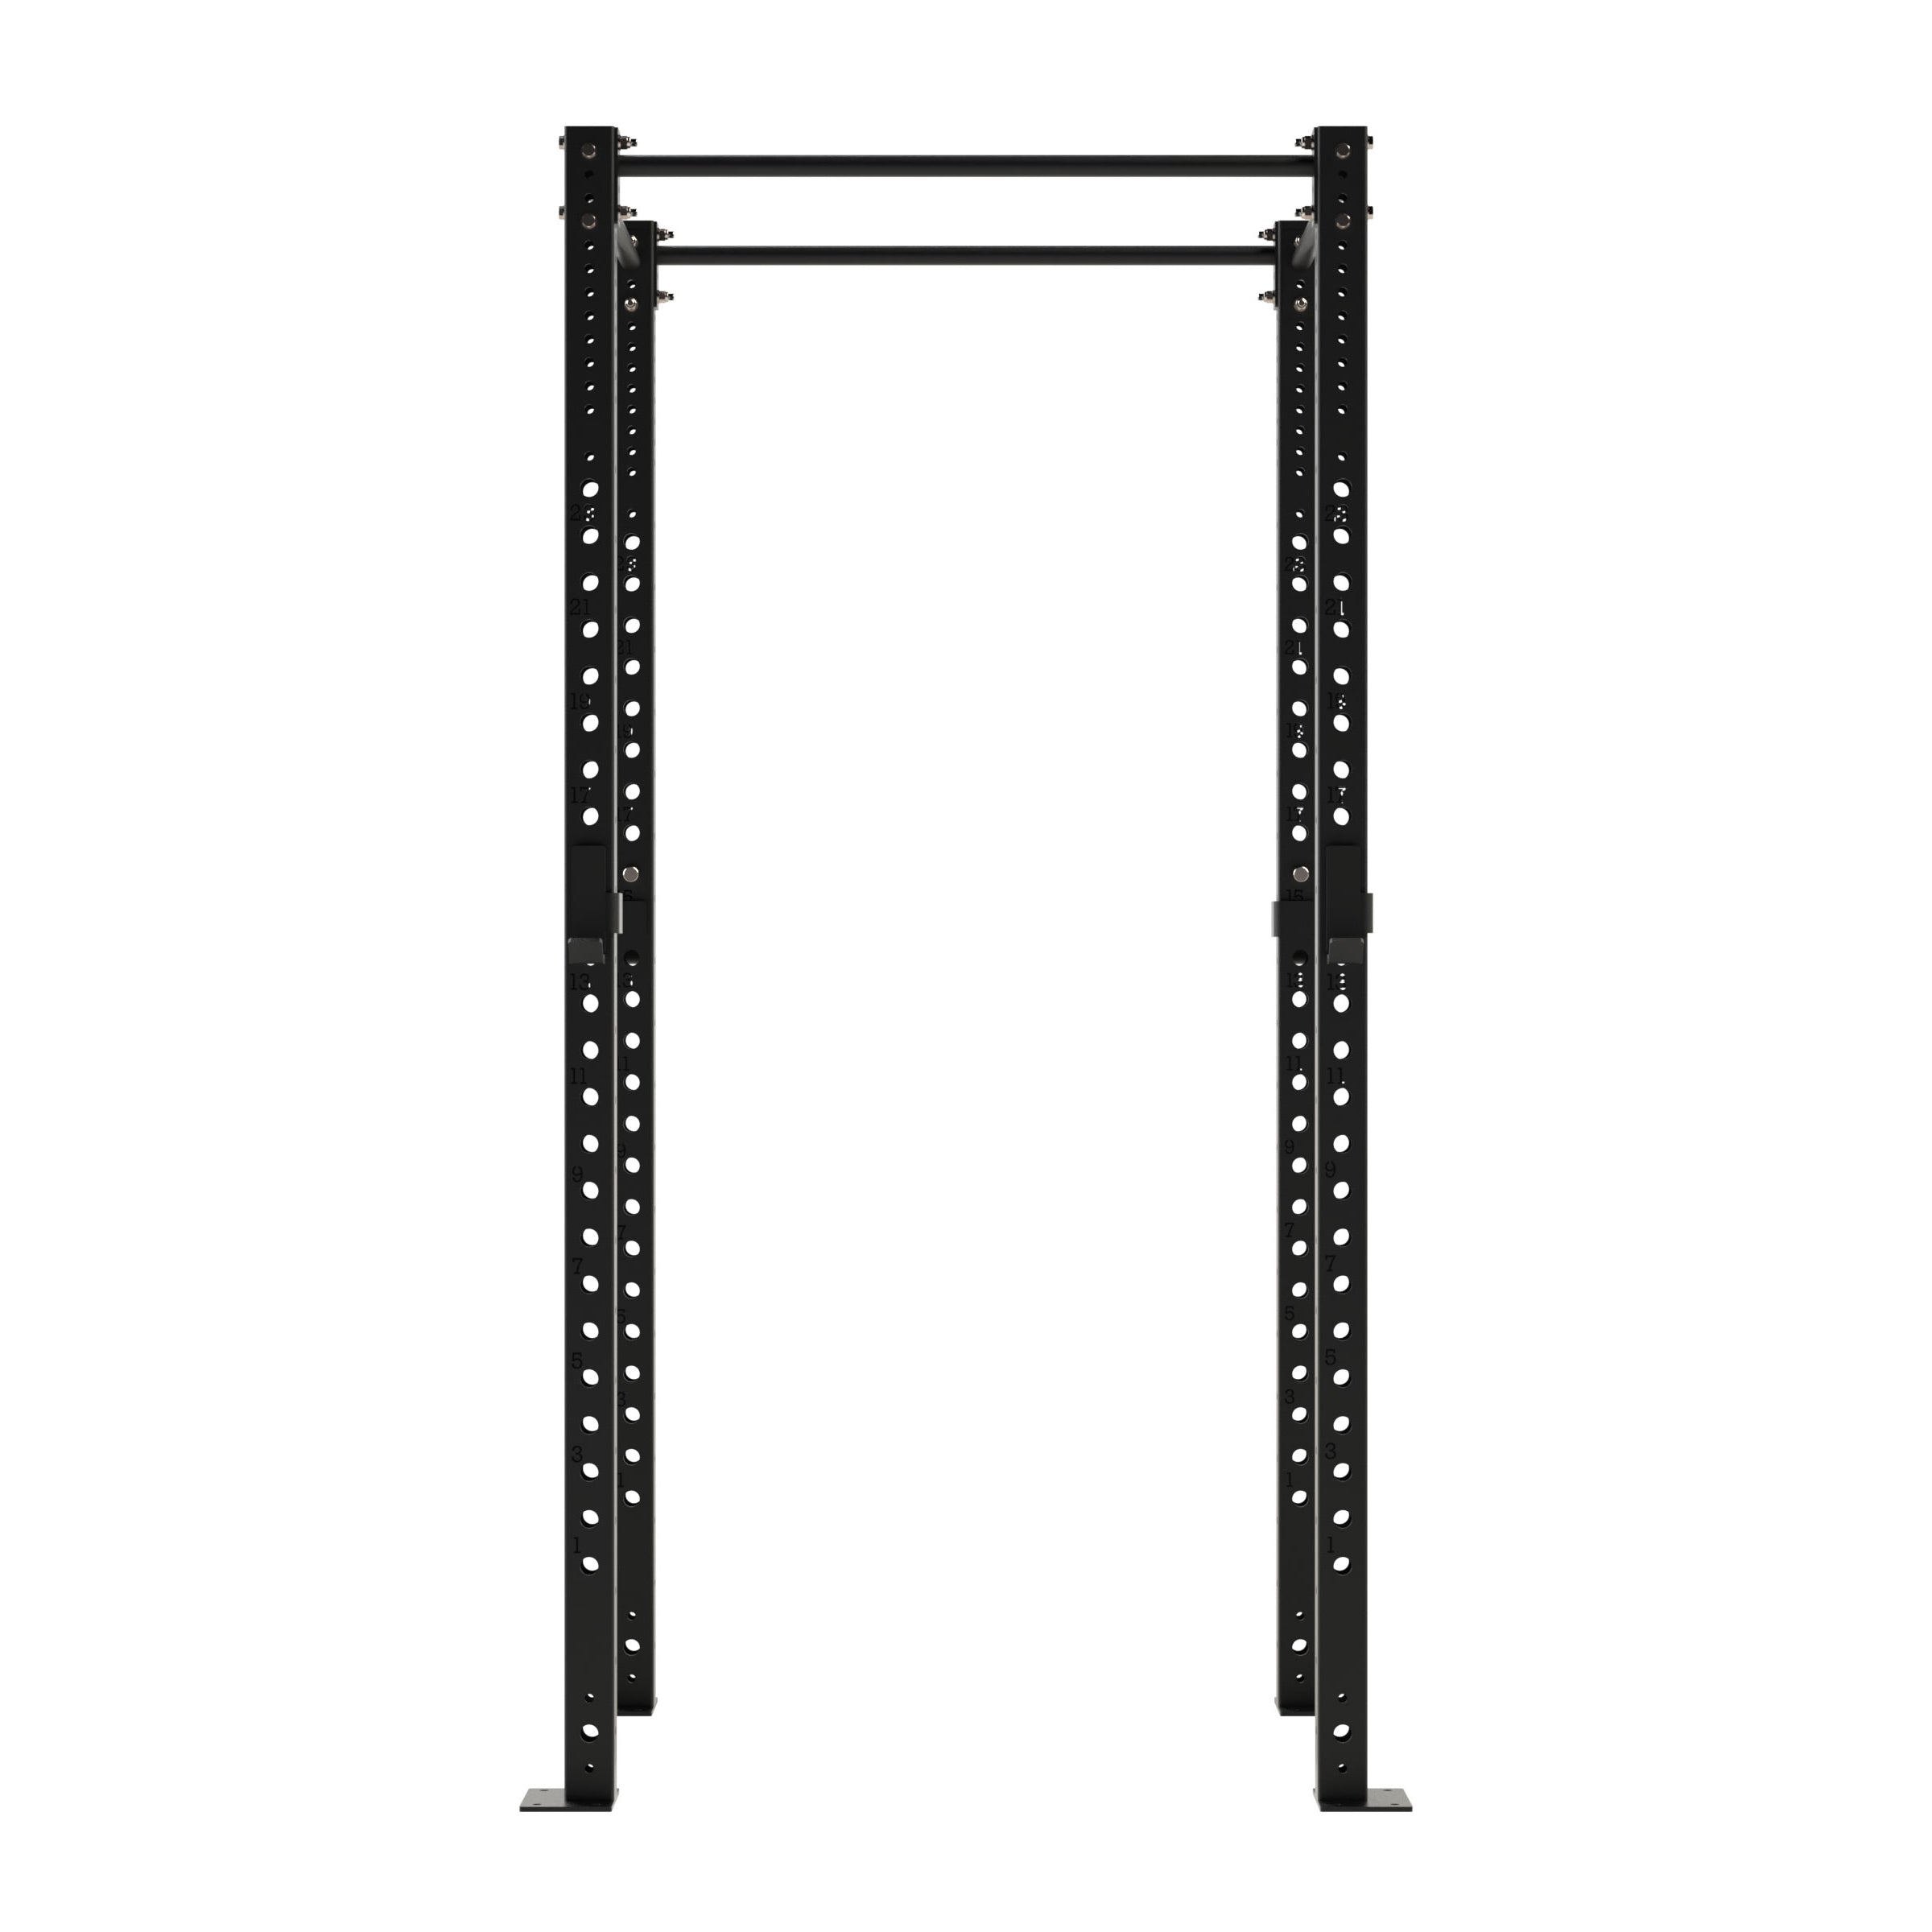 Bison Series - 2 Bay Freestanding Rig - Wolverson Fitness